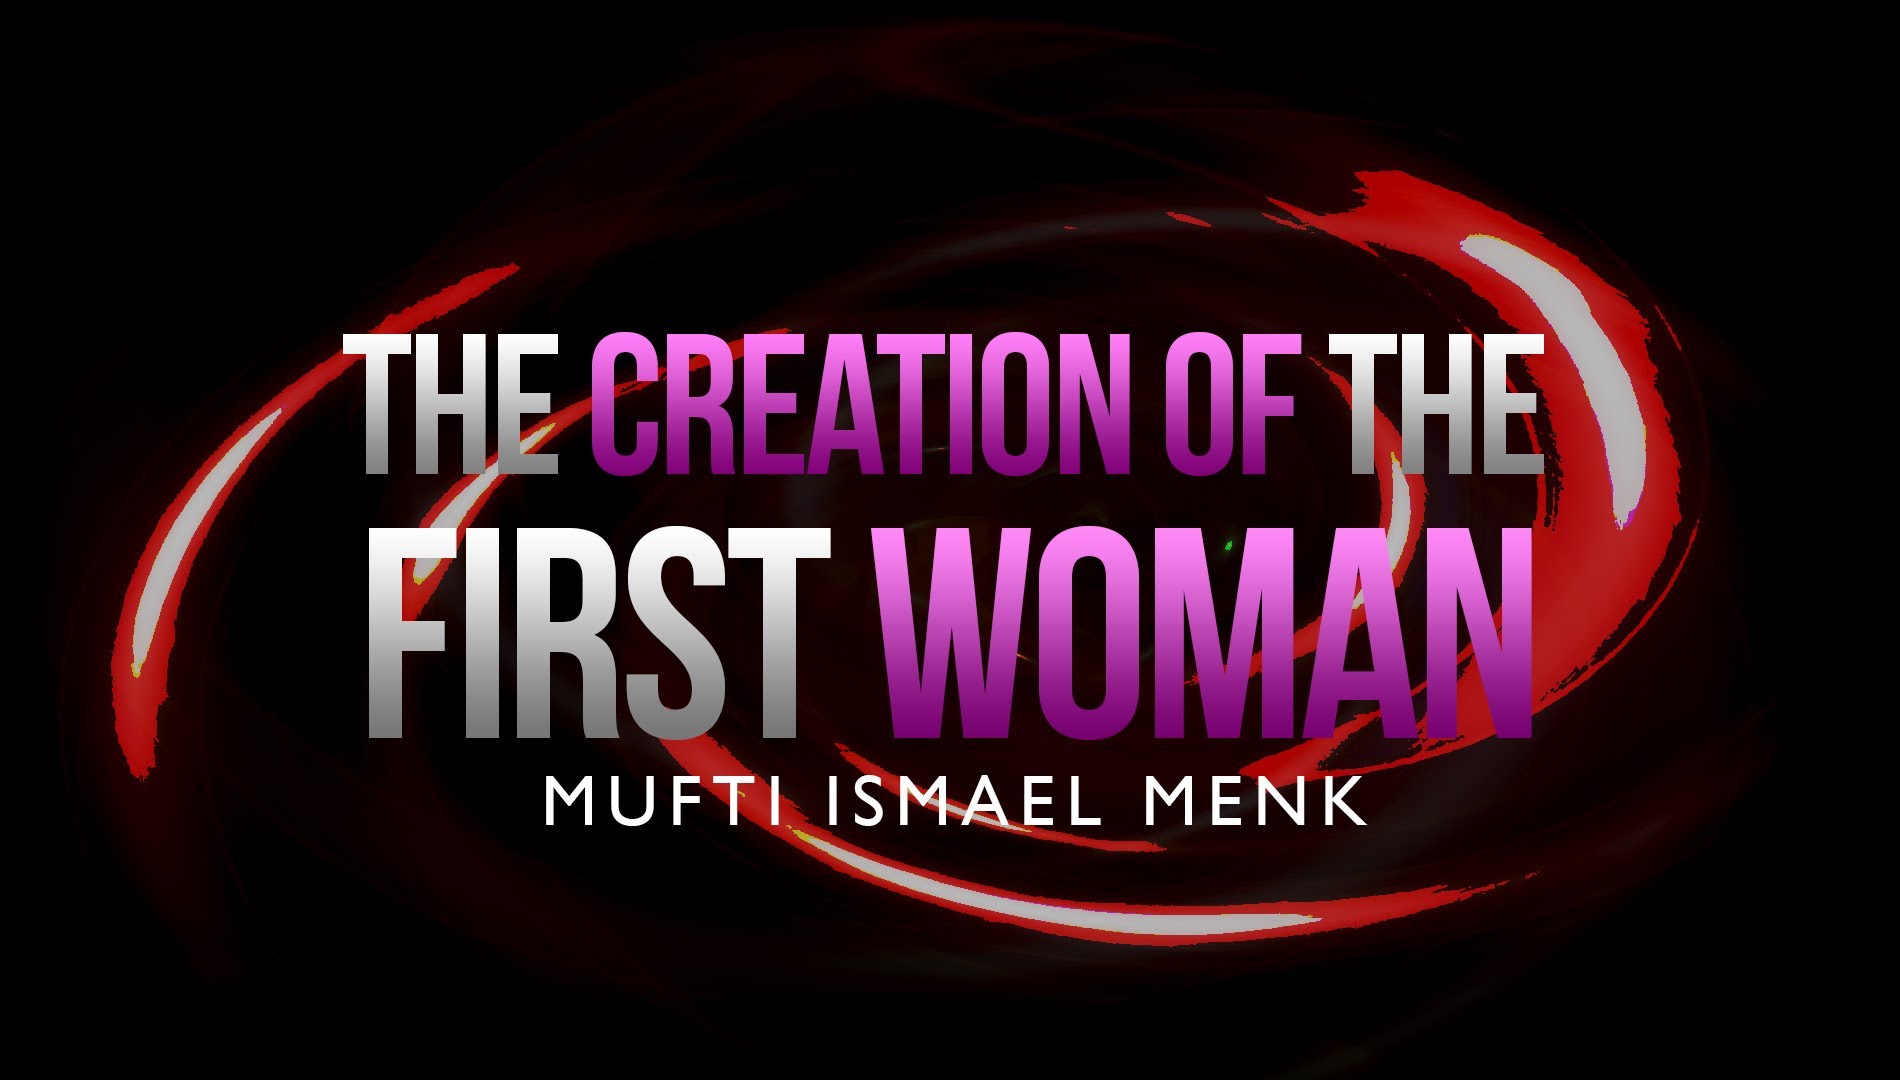 The Creation Of the First Woman - Mufti Ismael Menk